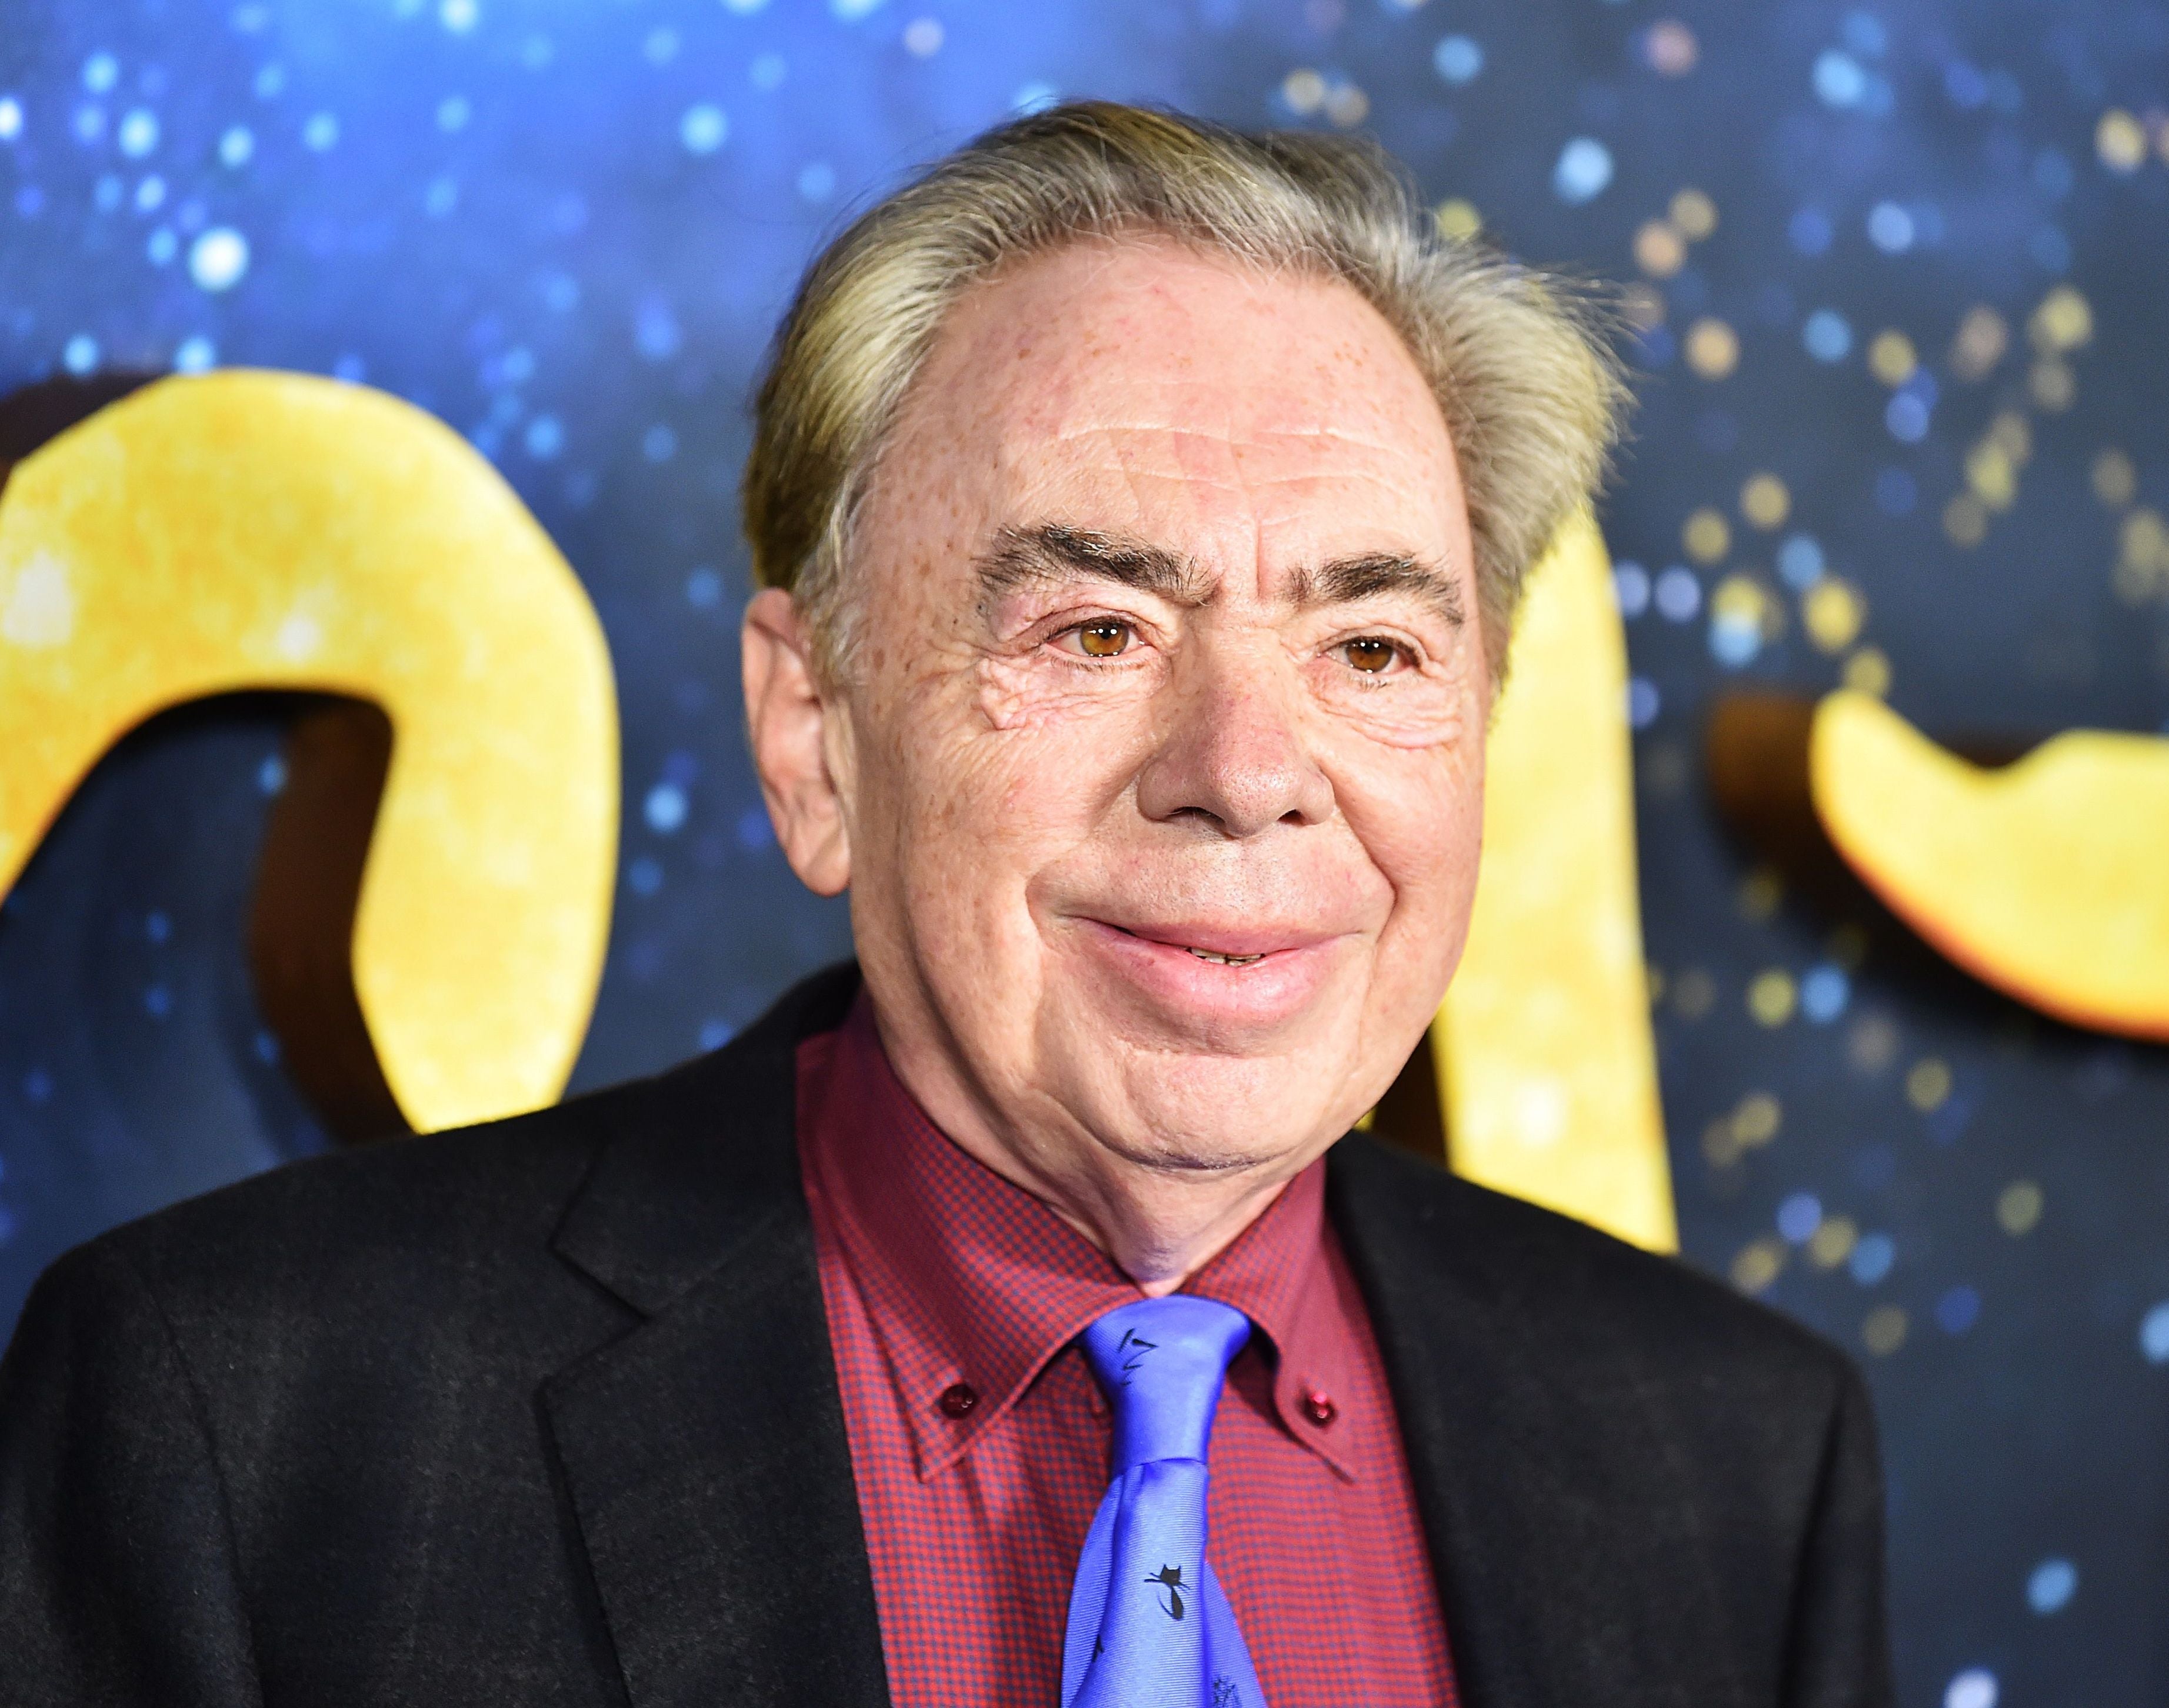 Andrew Lloyd Webber at the world premiere of a film not about the Beatles